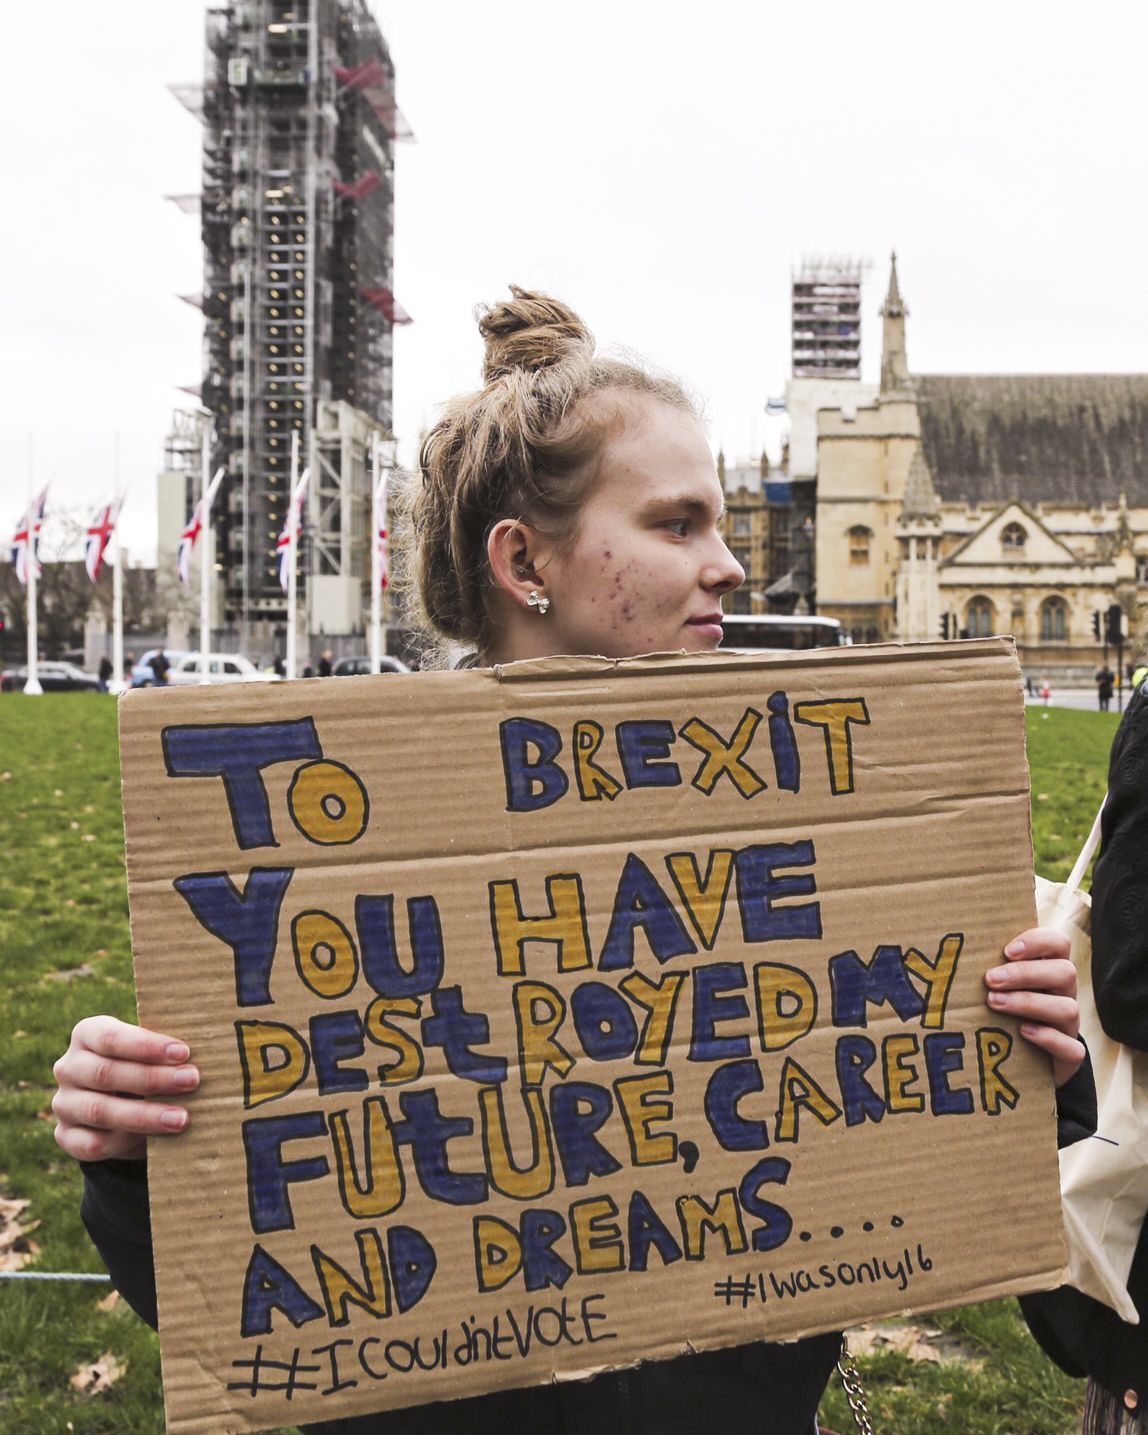 A person holding a sign saying “To Brexit you have destroyed my future, career and dreams” 